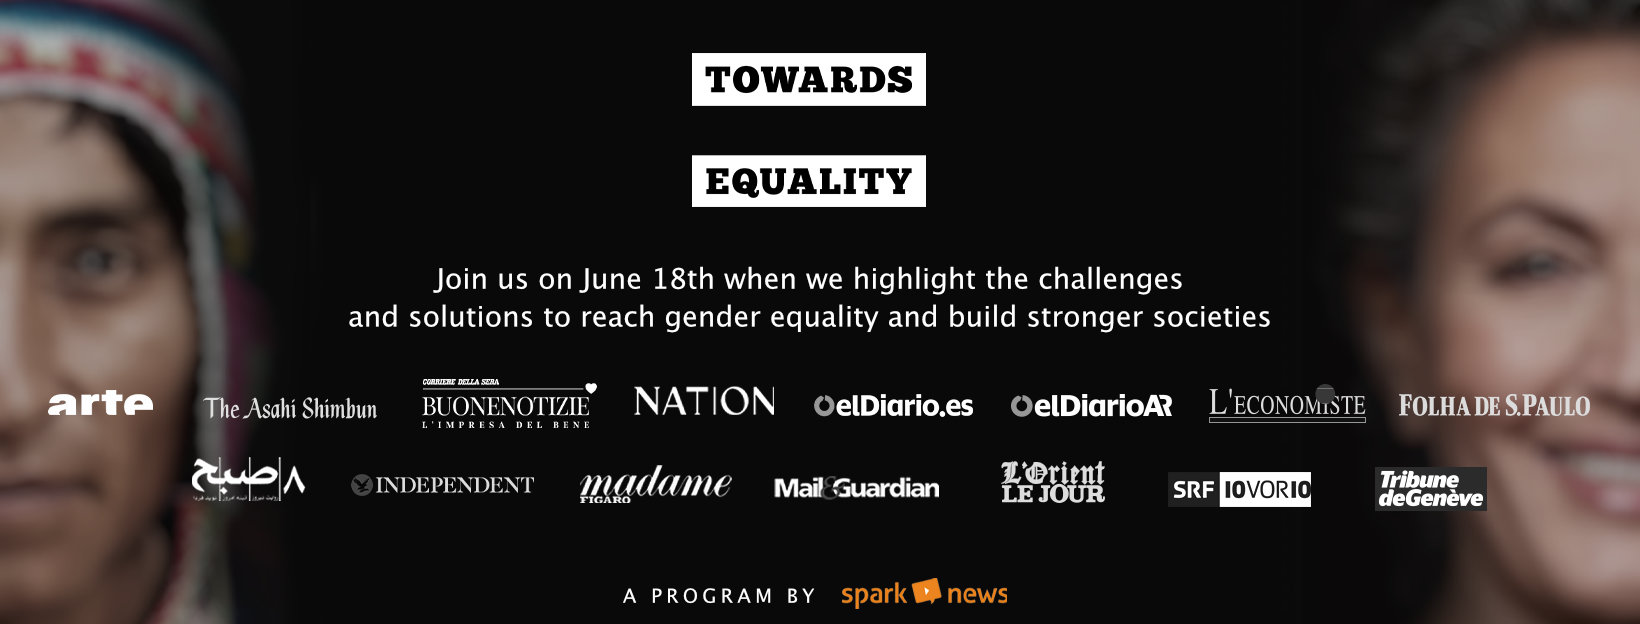 Towards Equality title image with CTA to join us on June 18th